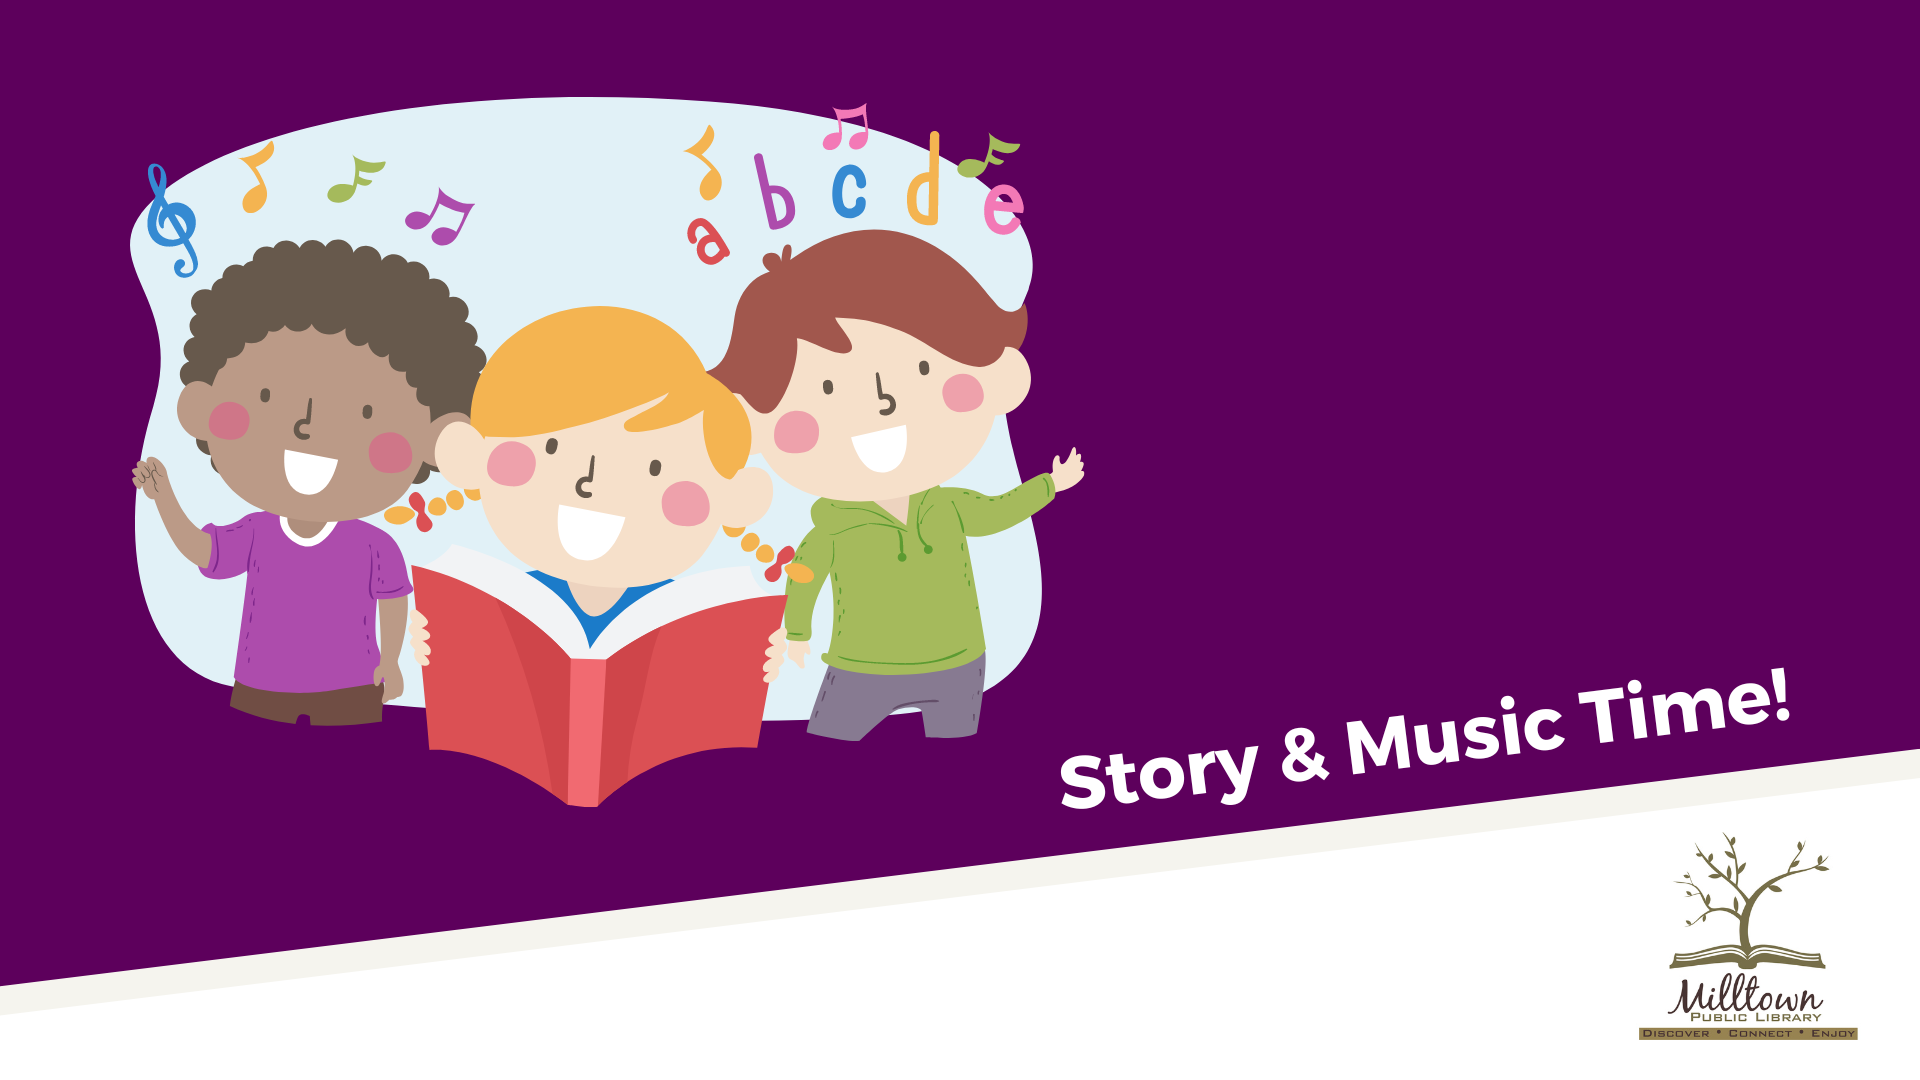 Story & Music Time